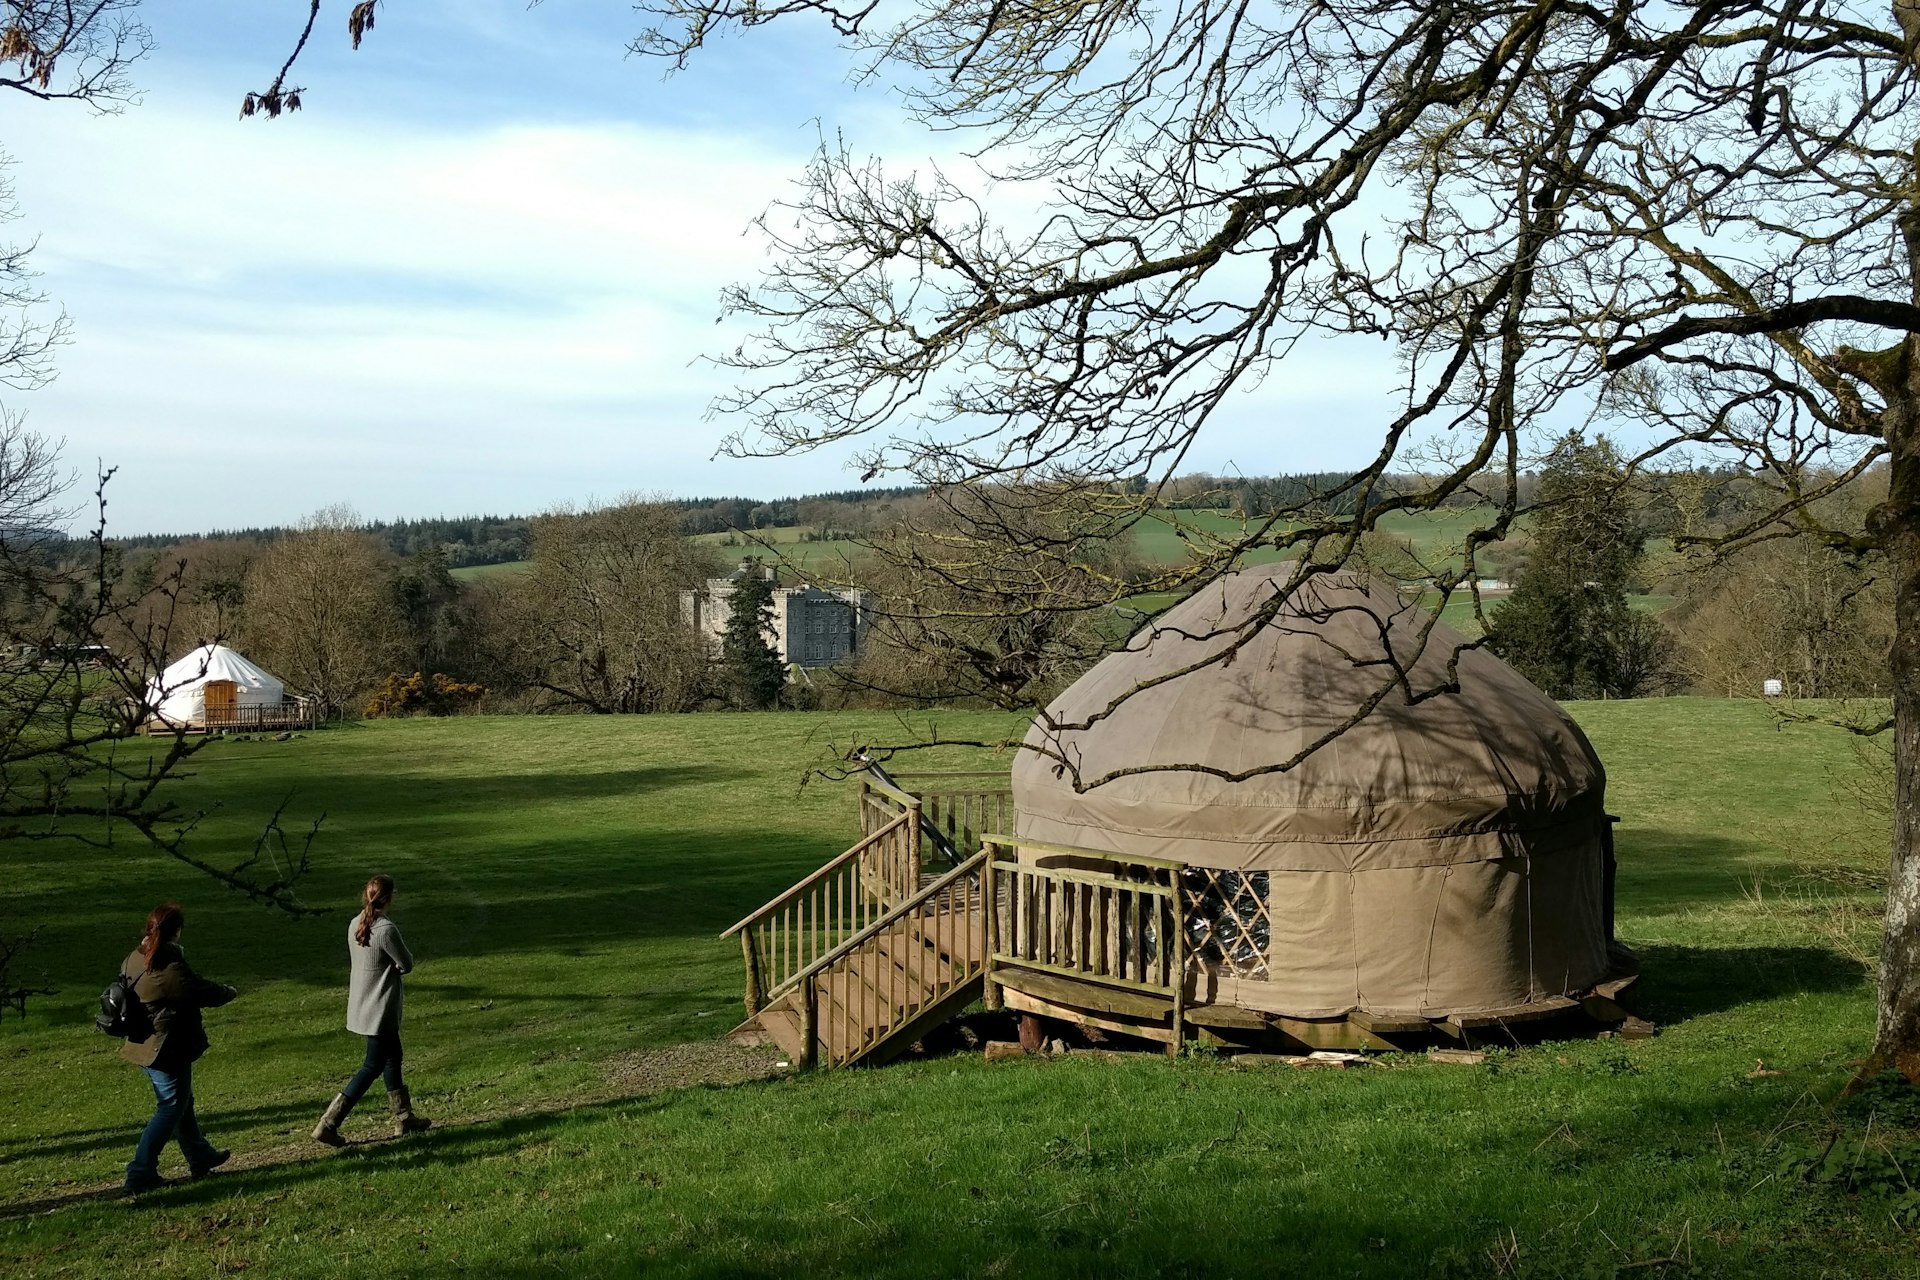 The Yurts at Rock Farm gaze down on Slane Castle, which connects George VI and Axl Rose © James Smart / Lonely Planet